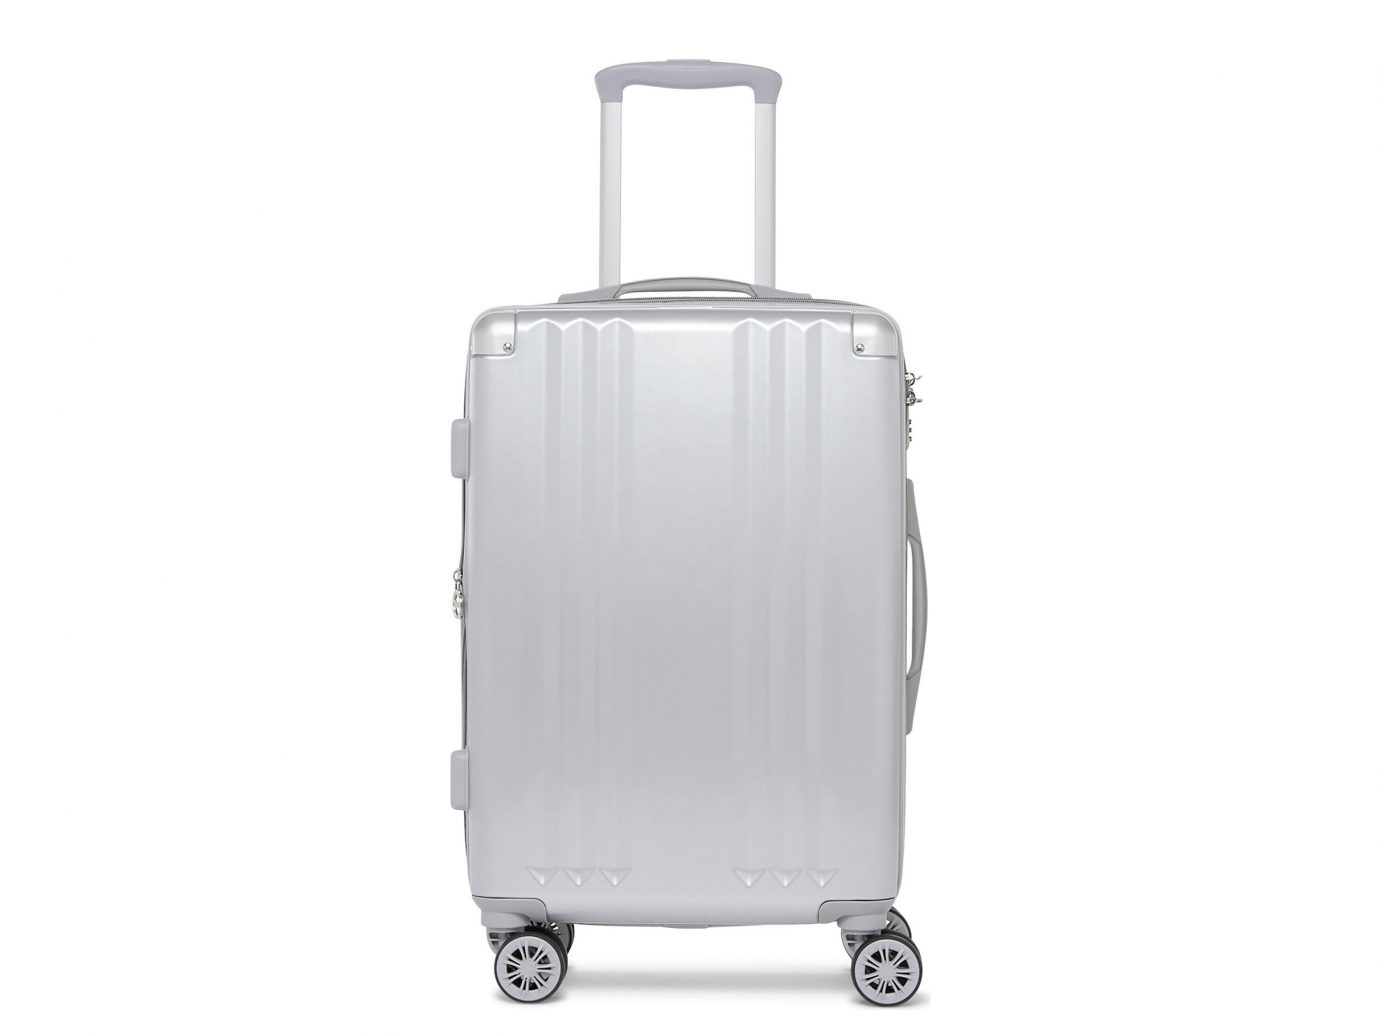 Style + Design white suitcase product product design hand luggage luggage & bags appliance metal silver kitchen appliance